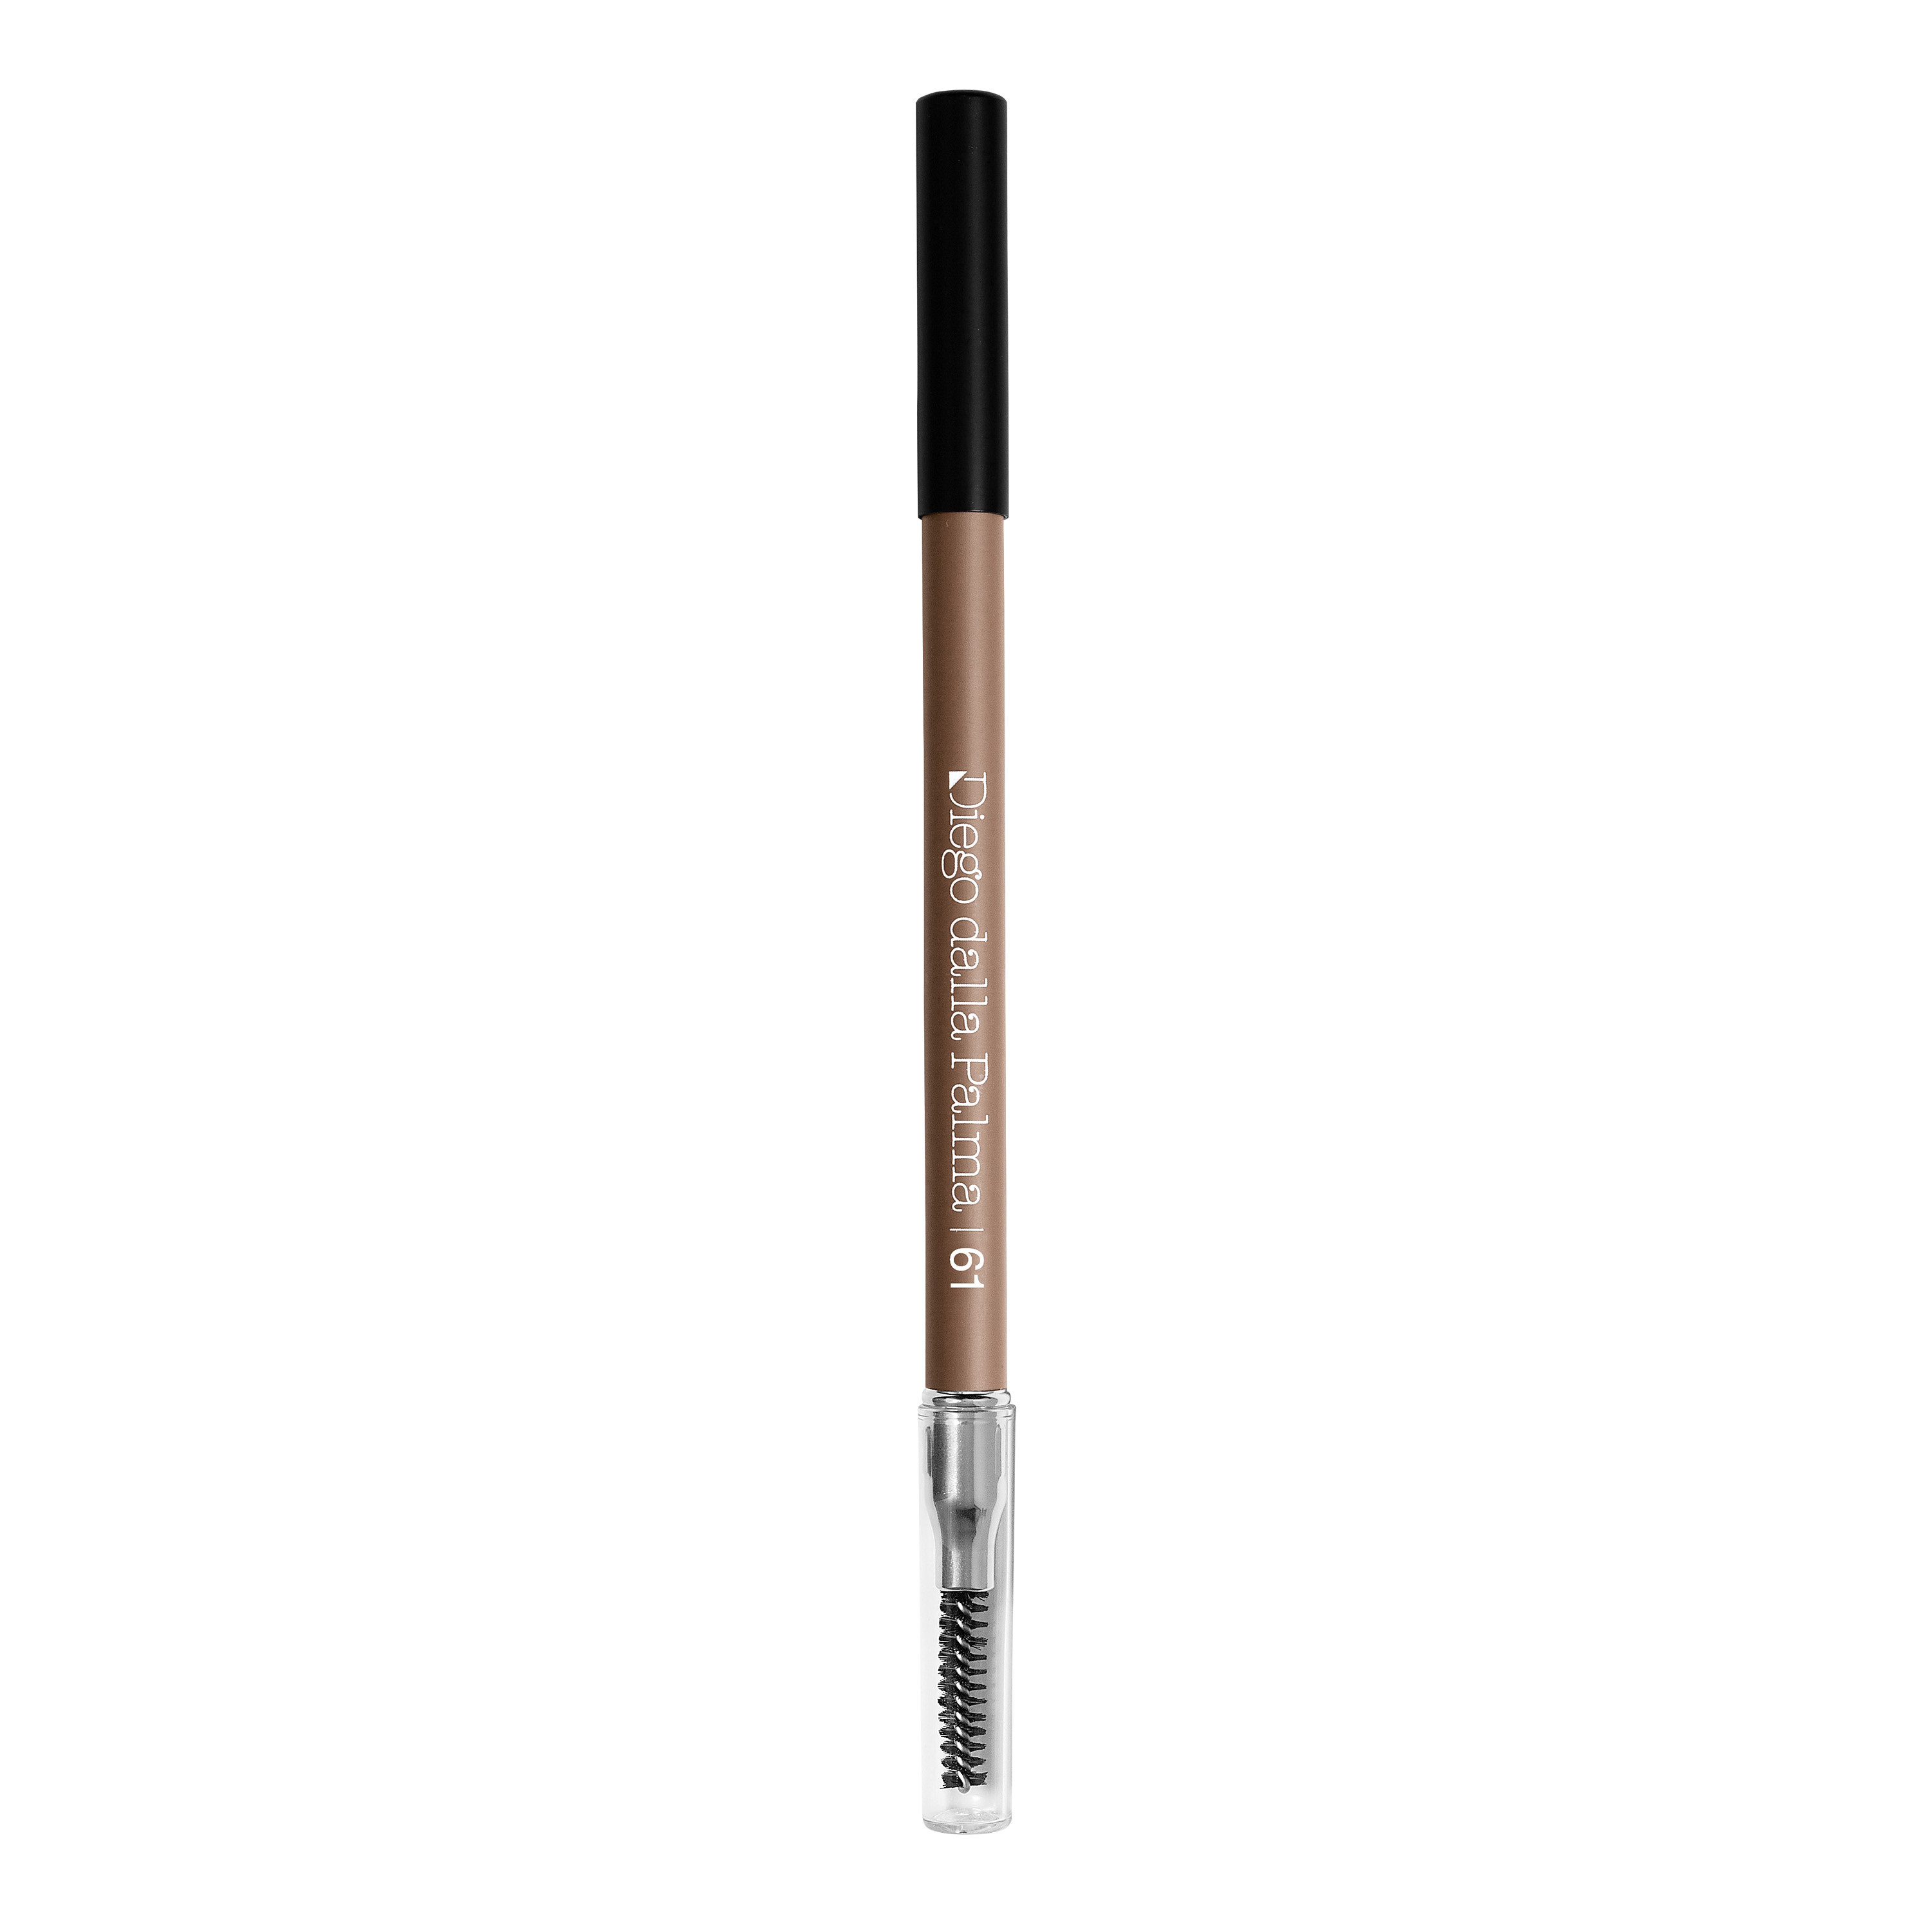 Powder Pencil For Eyebrows - 61 cappuccino, Light Brown, large image number 1